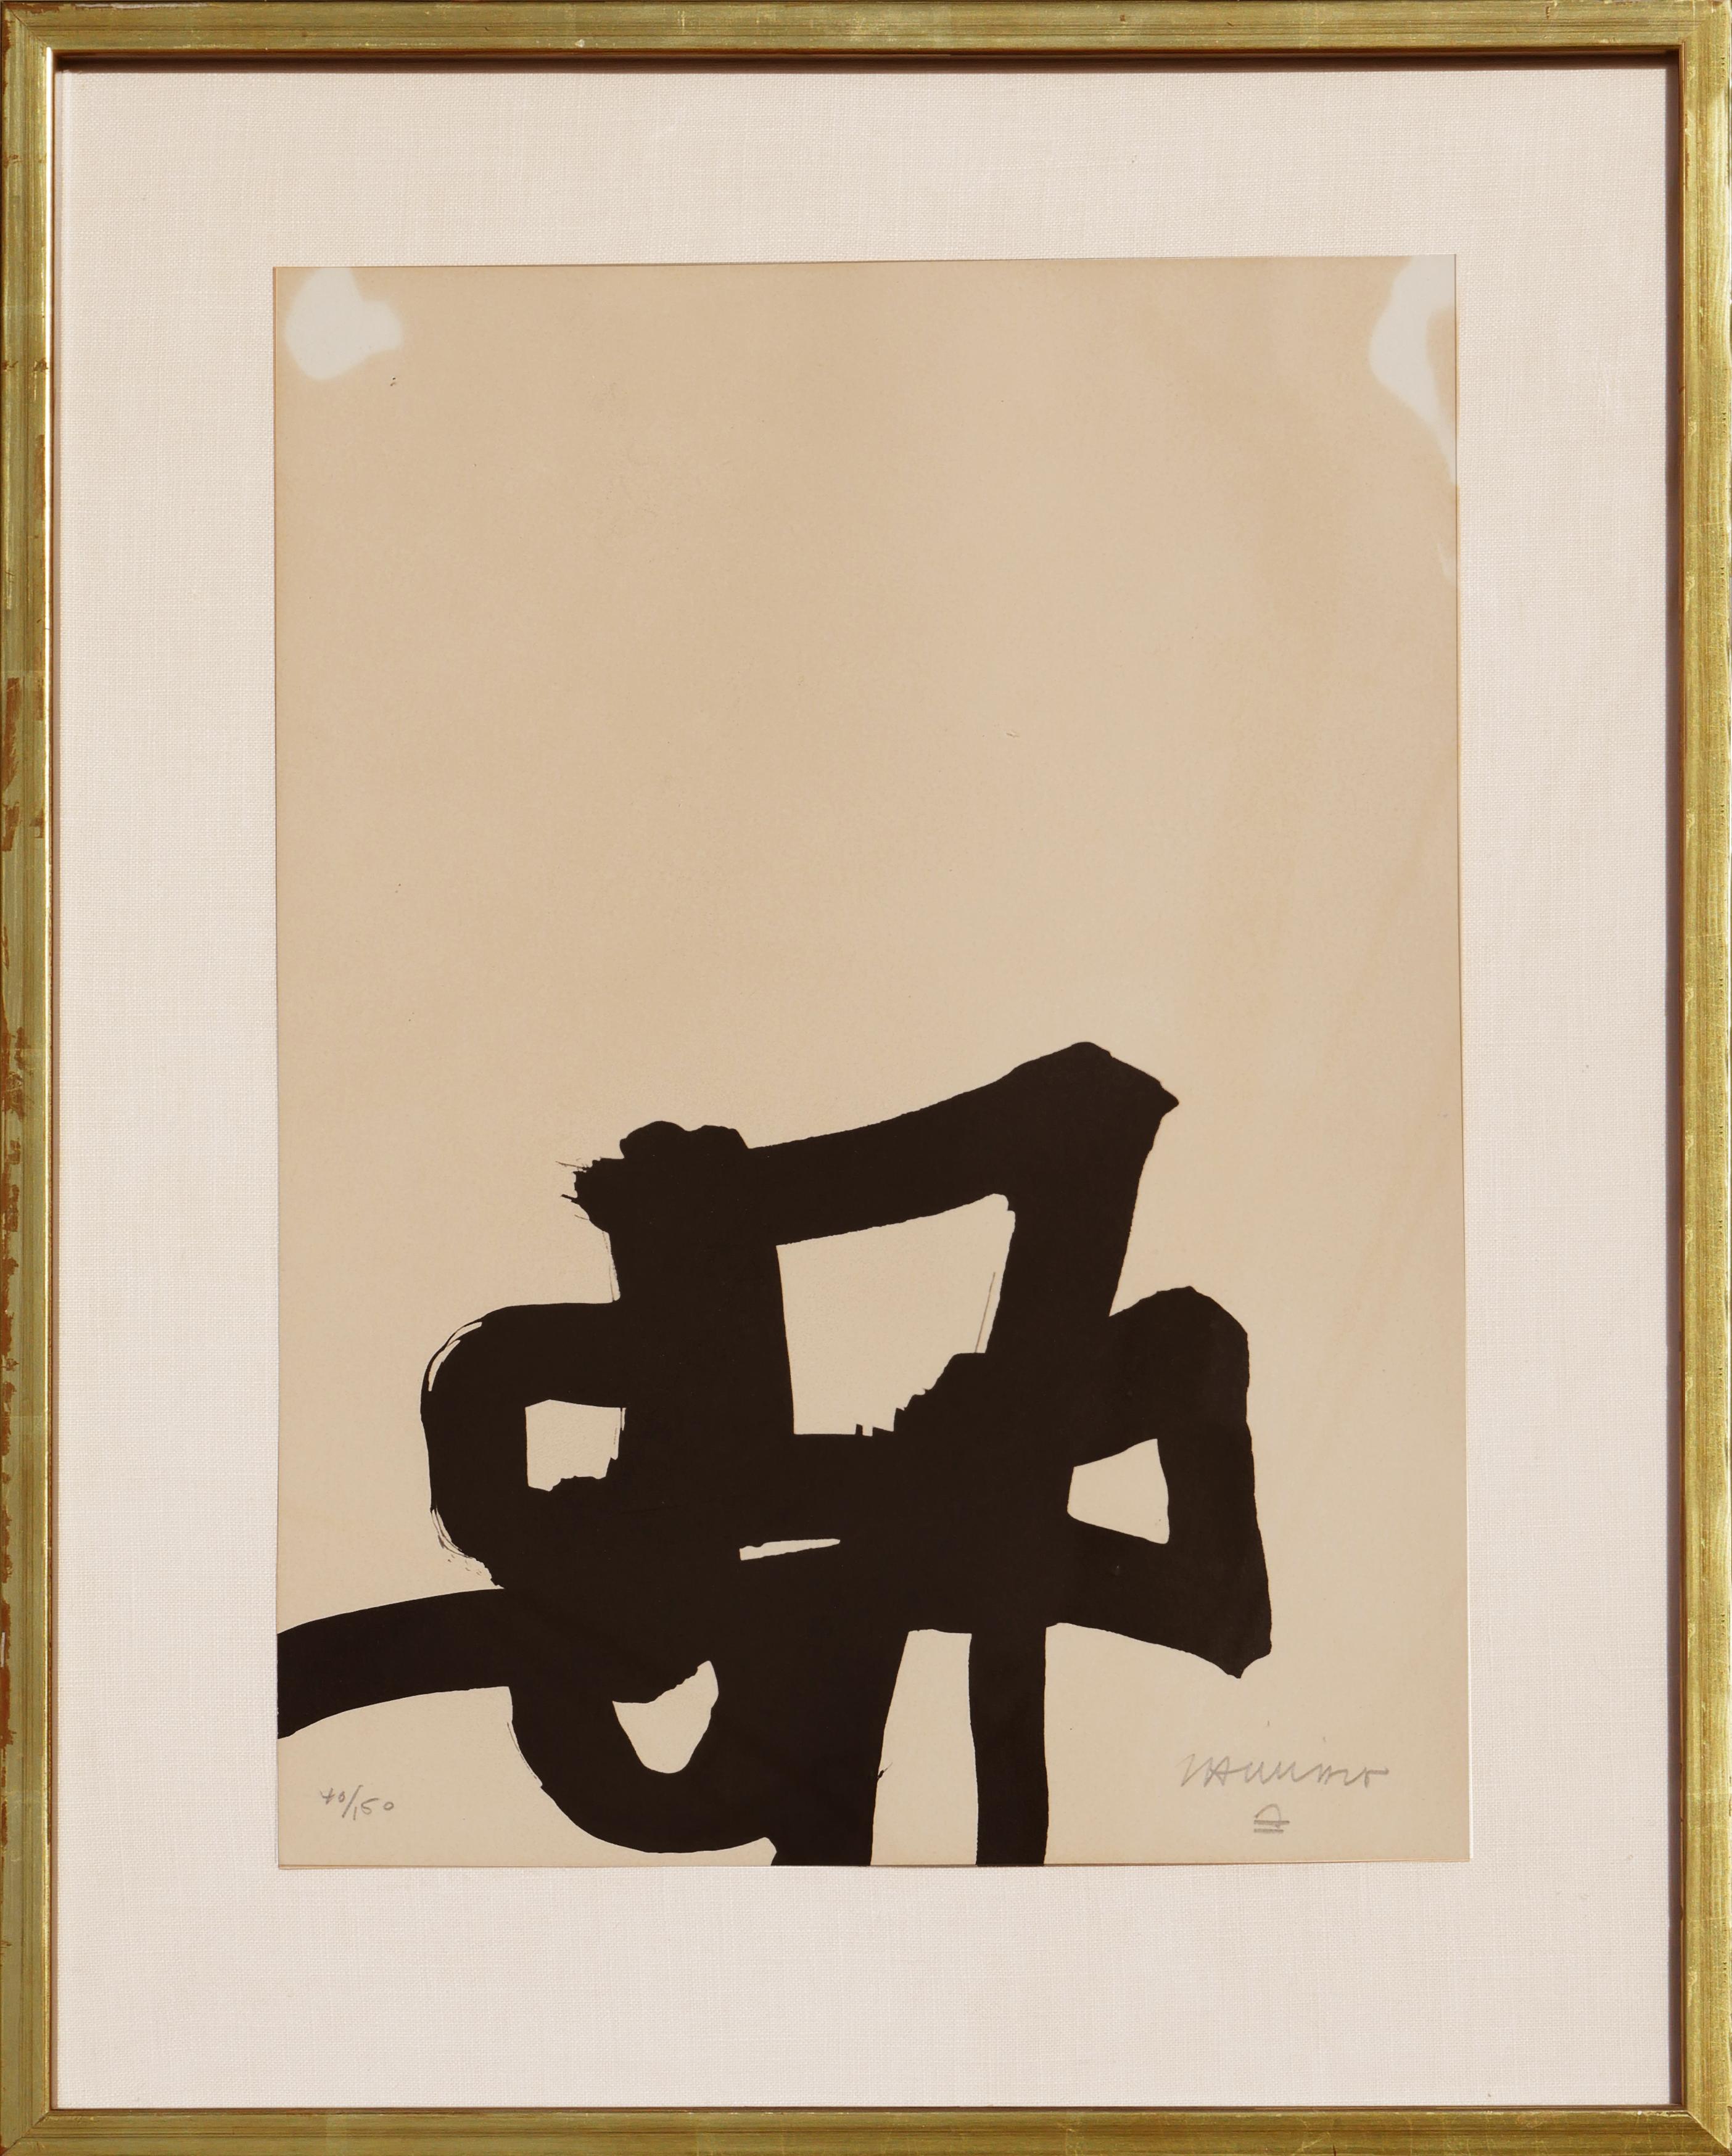 Eduardo Chillida Abstract Print - “Dentro y Fuera” Black and White Abstract Modern Lithograph